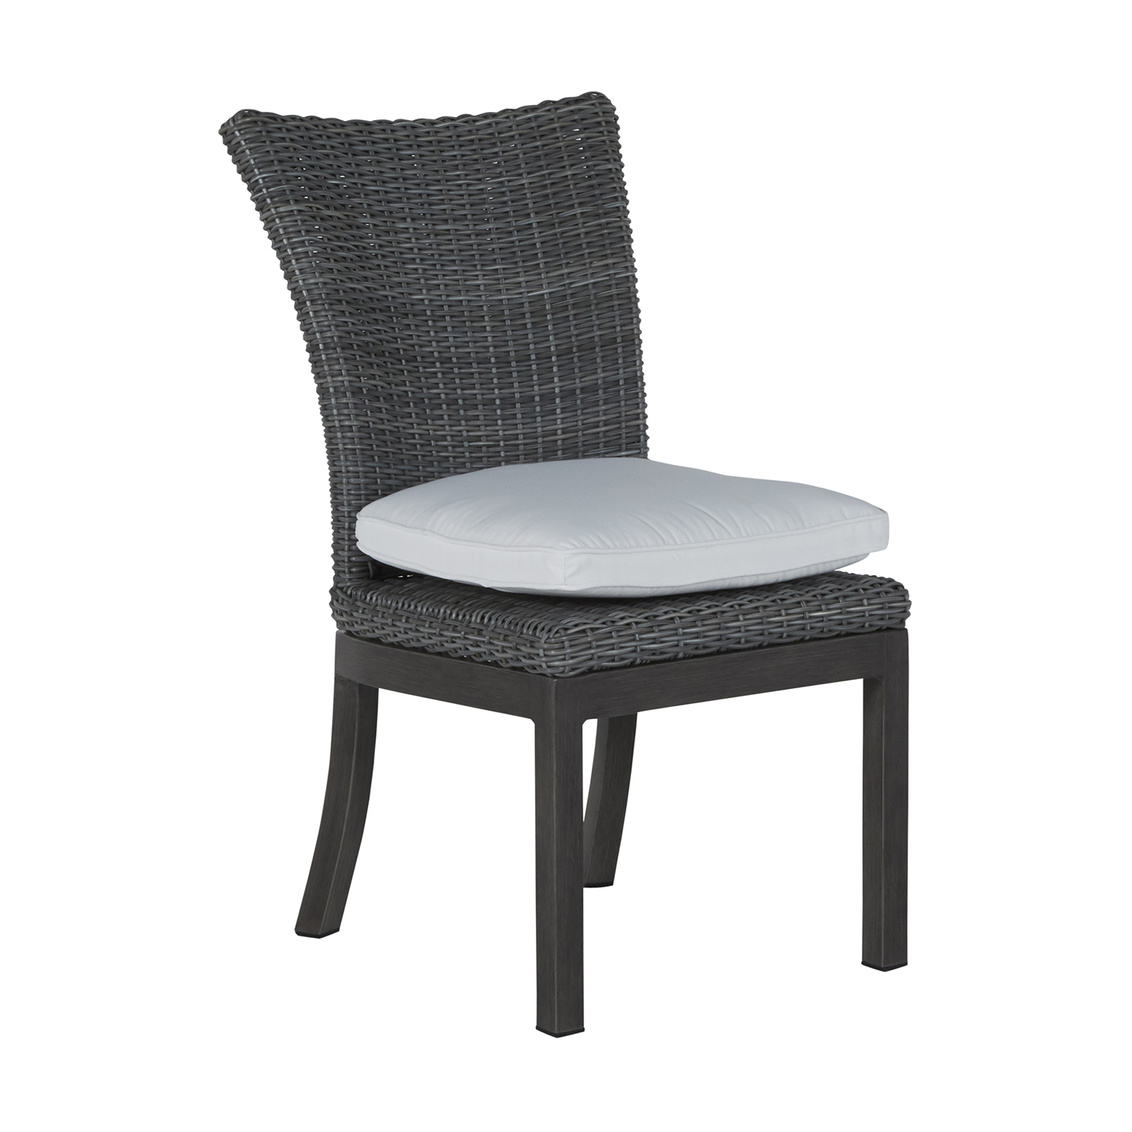 rustic side chair in slate grey – frame only product image